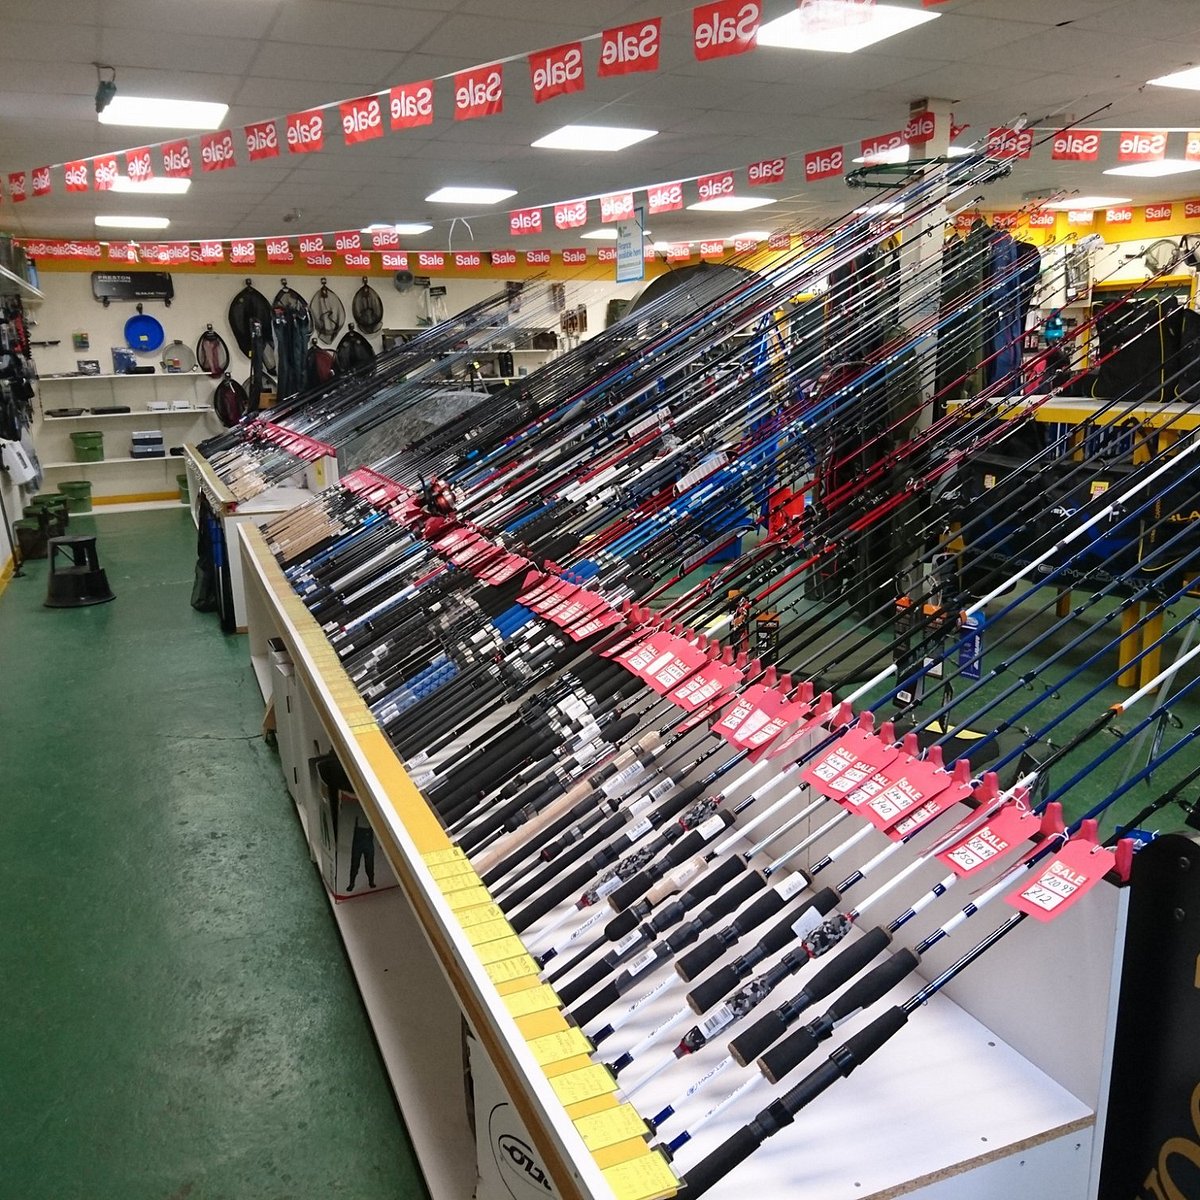 LIONEL'S TACKLE SHOP: All You Need to Know BEFORE You Go (with Photos)